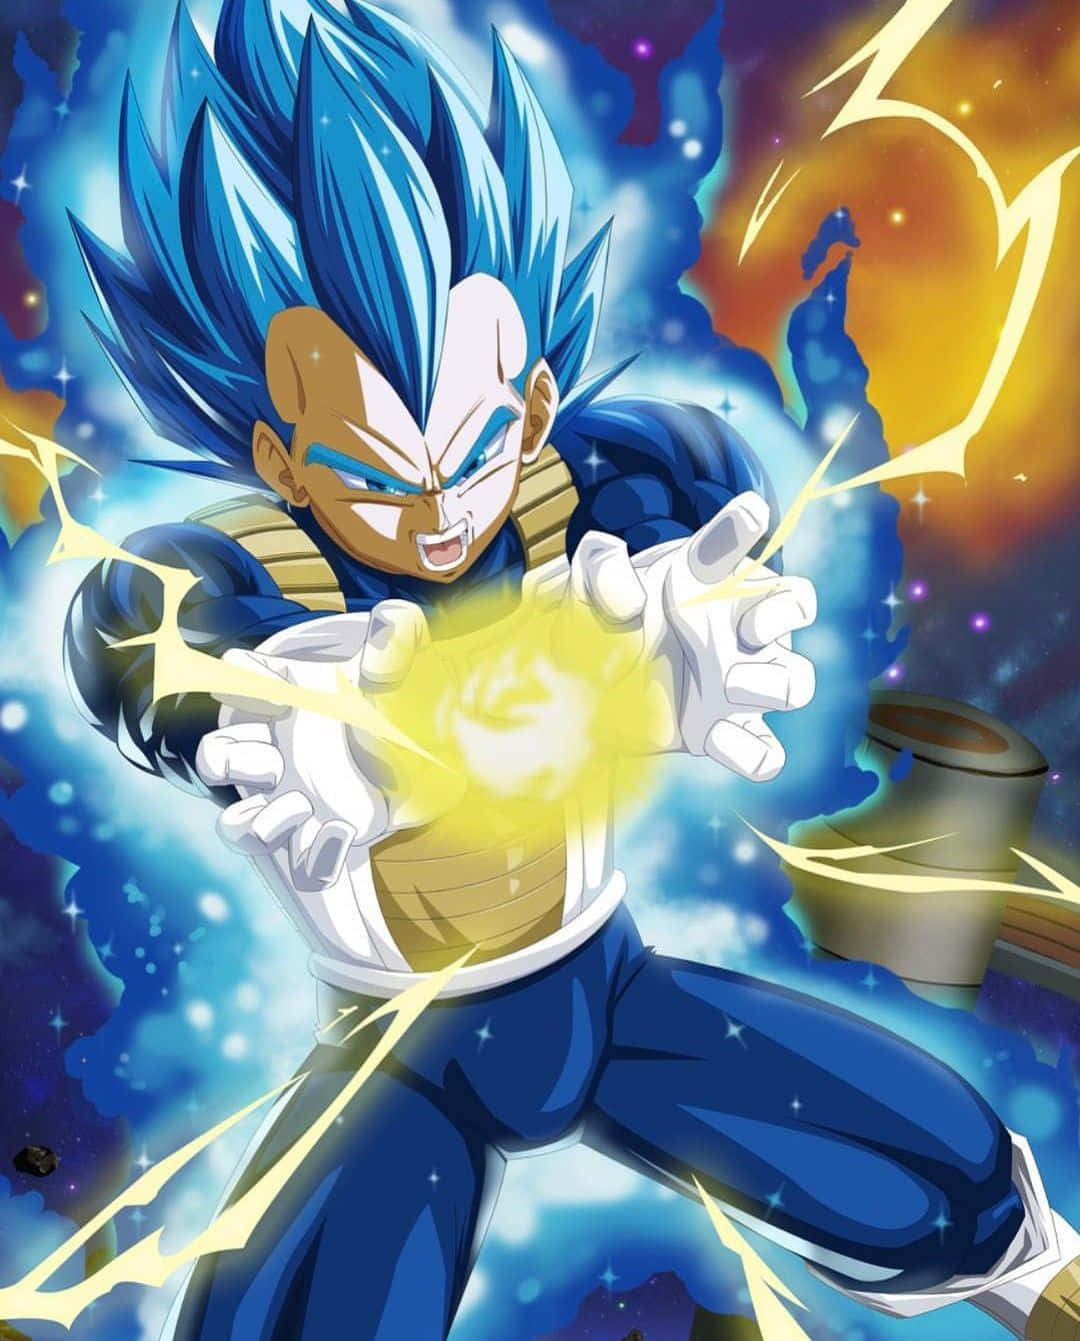 Vegeta Final Flash Posters for Sale